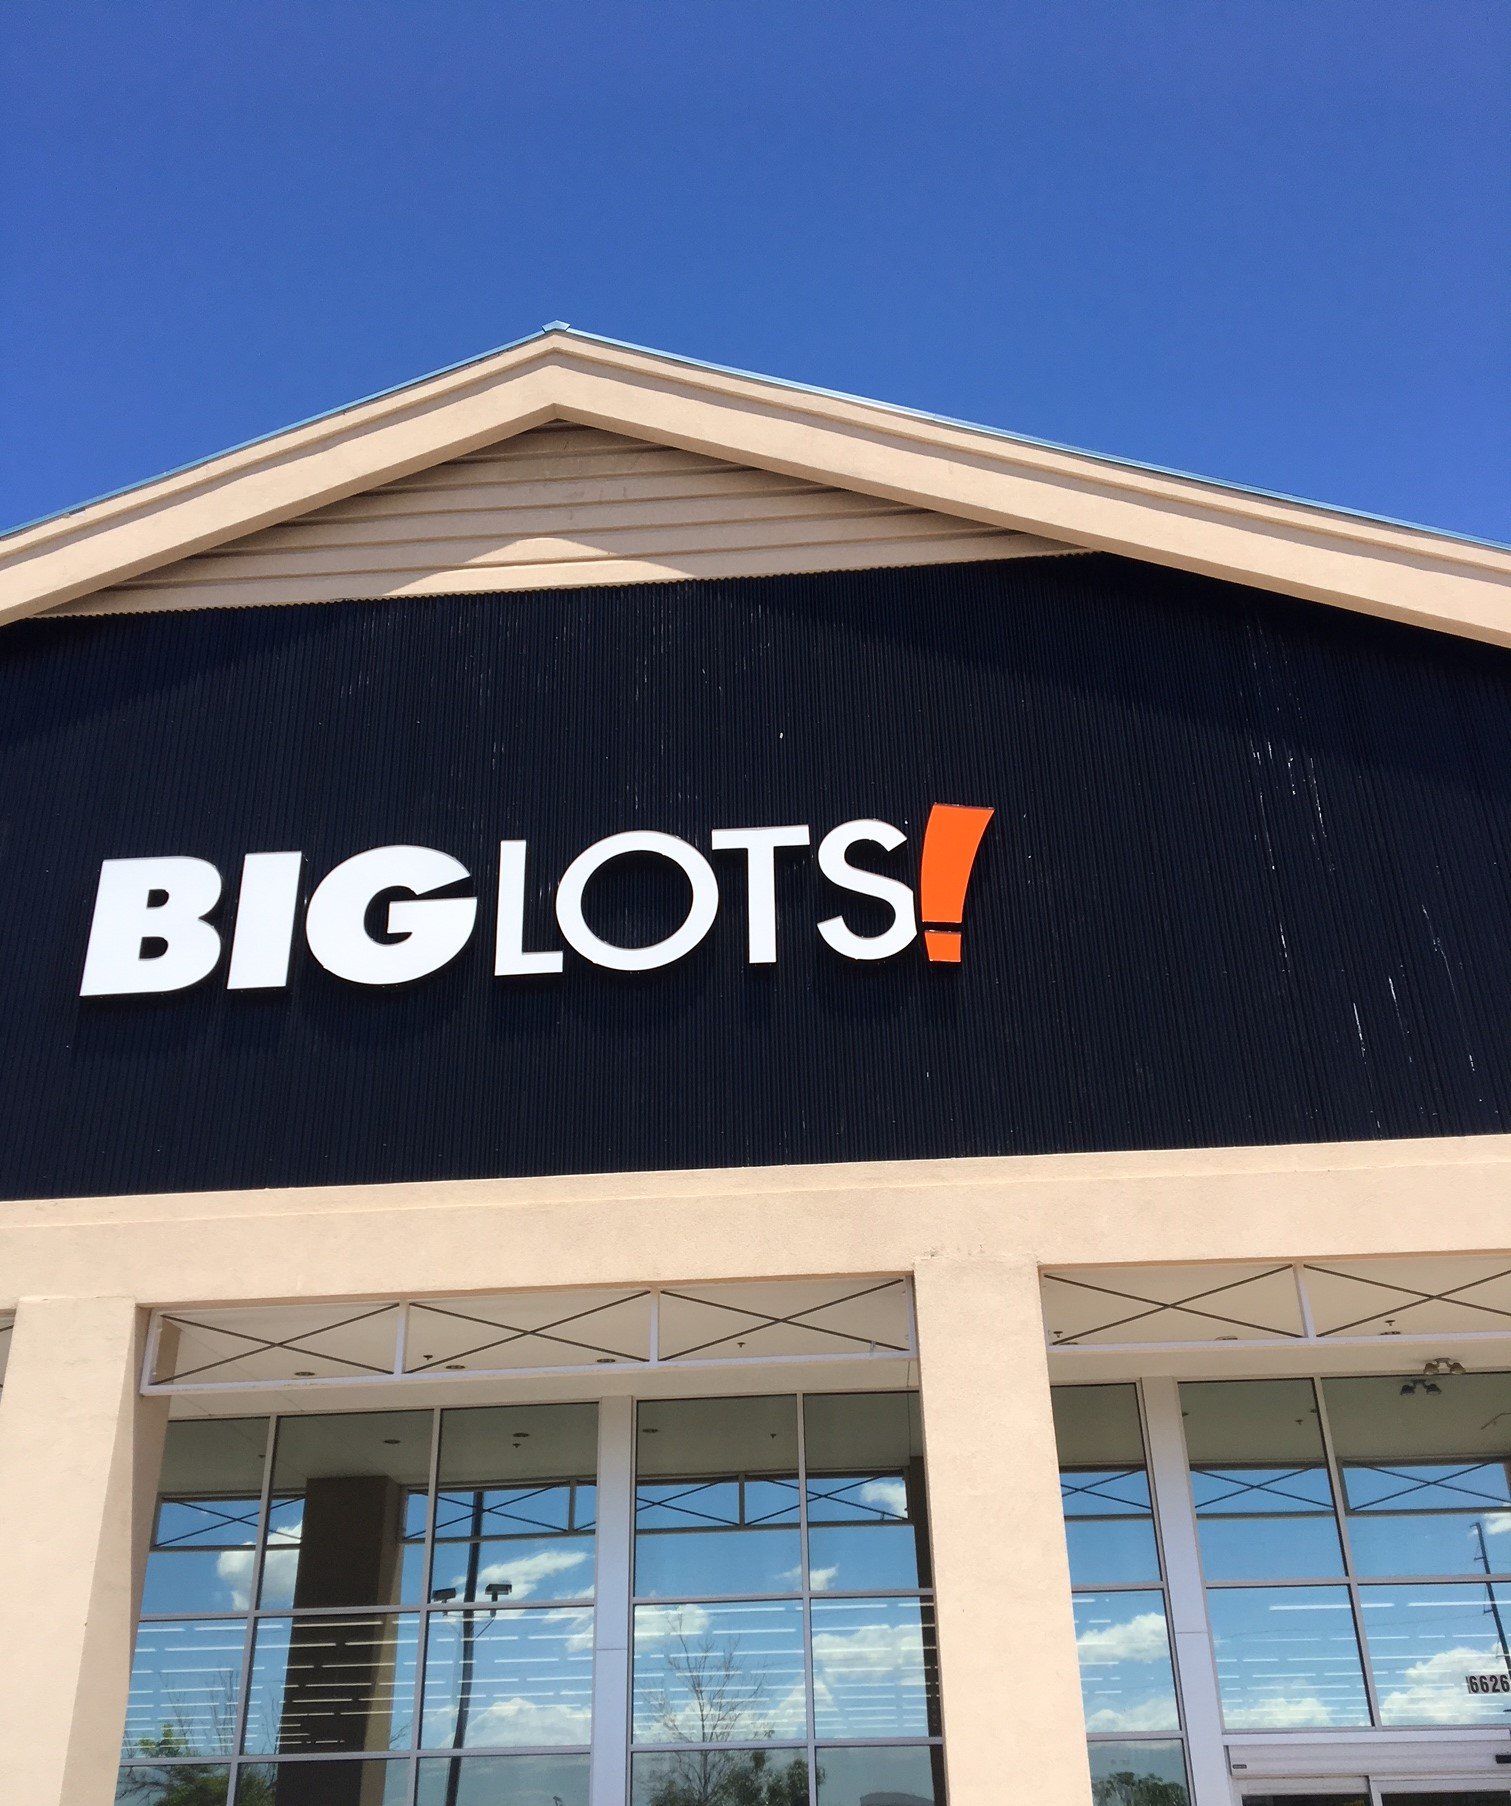 Visit The Big Lots in Aurora, Located on South Parker Rd